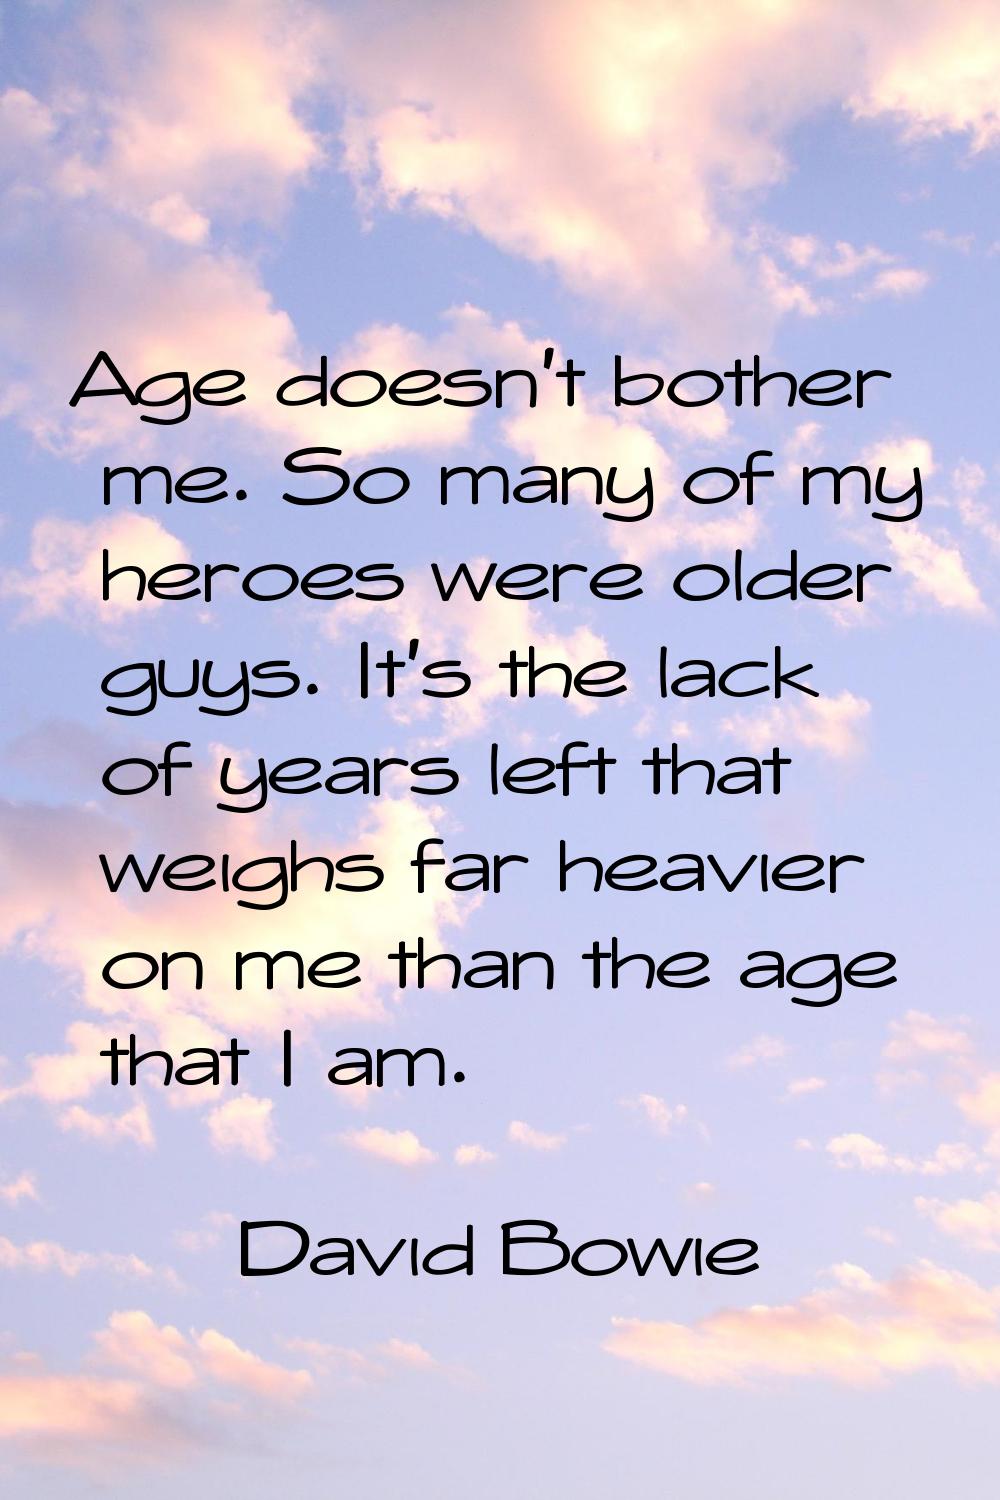 Age doesn't bother me. So many of my heroes were older guys. It's the lack of years left that weigh